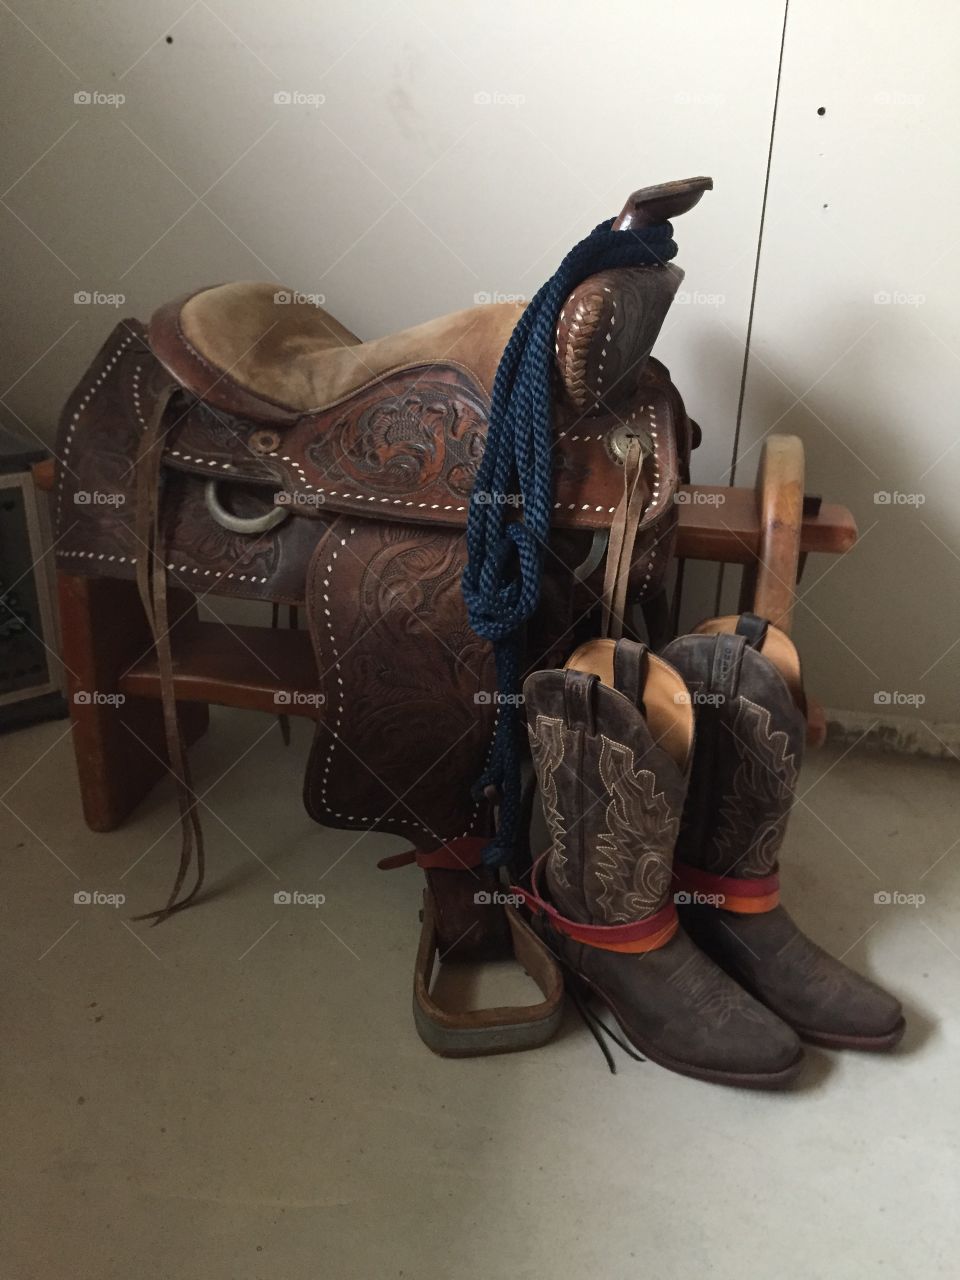 Cow girls gear The sweet smell of leather Riding boots Rope ready leather one of the most use products for hundreds of years so underrated